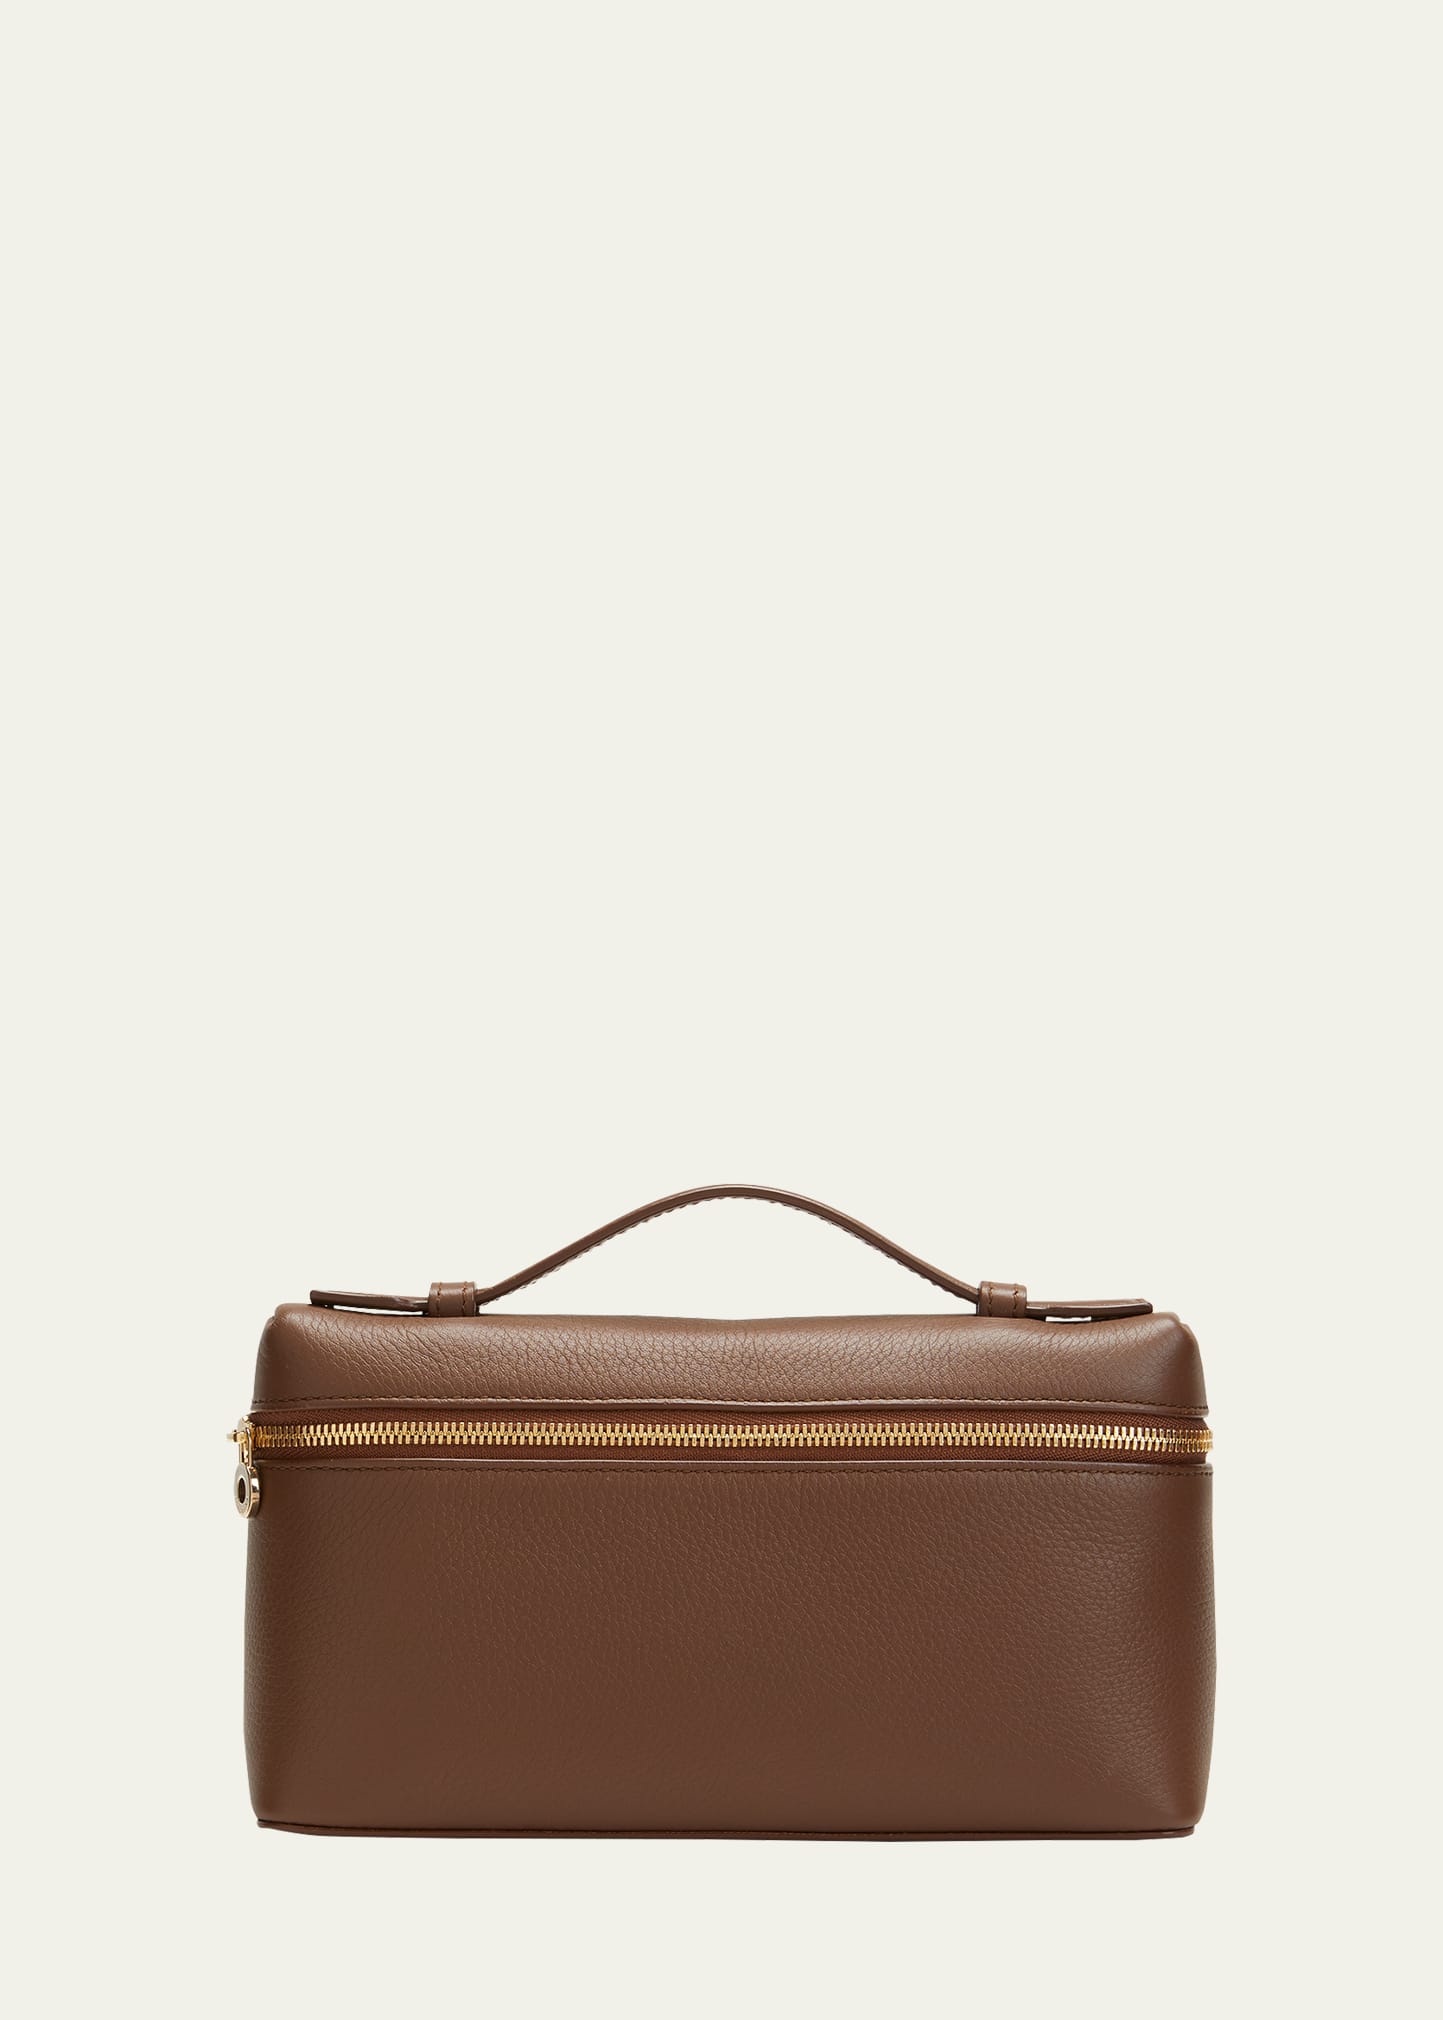 Extra Love For Loro Piana's Extra Case - BAGAHOLICBOY